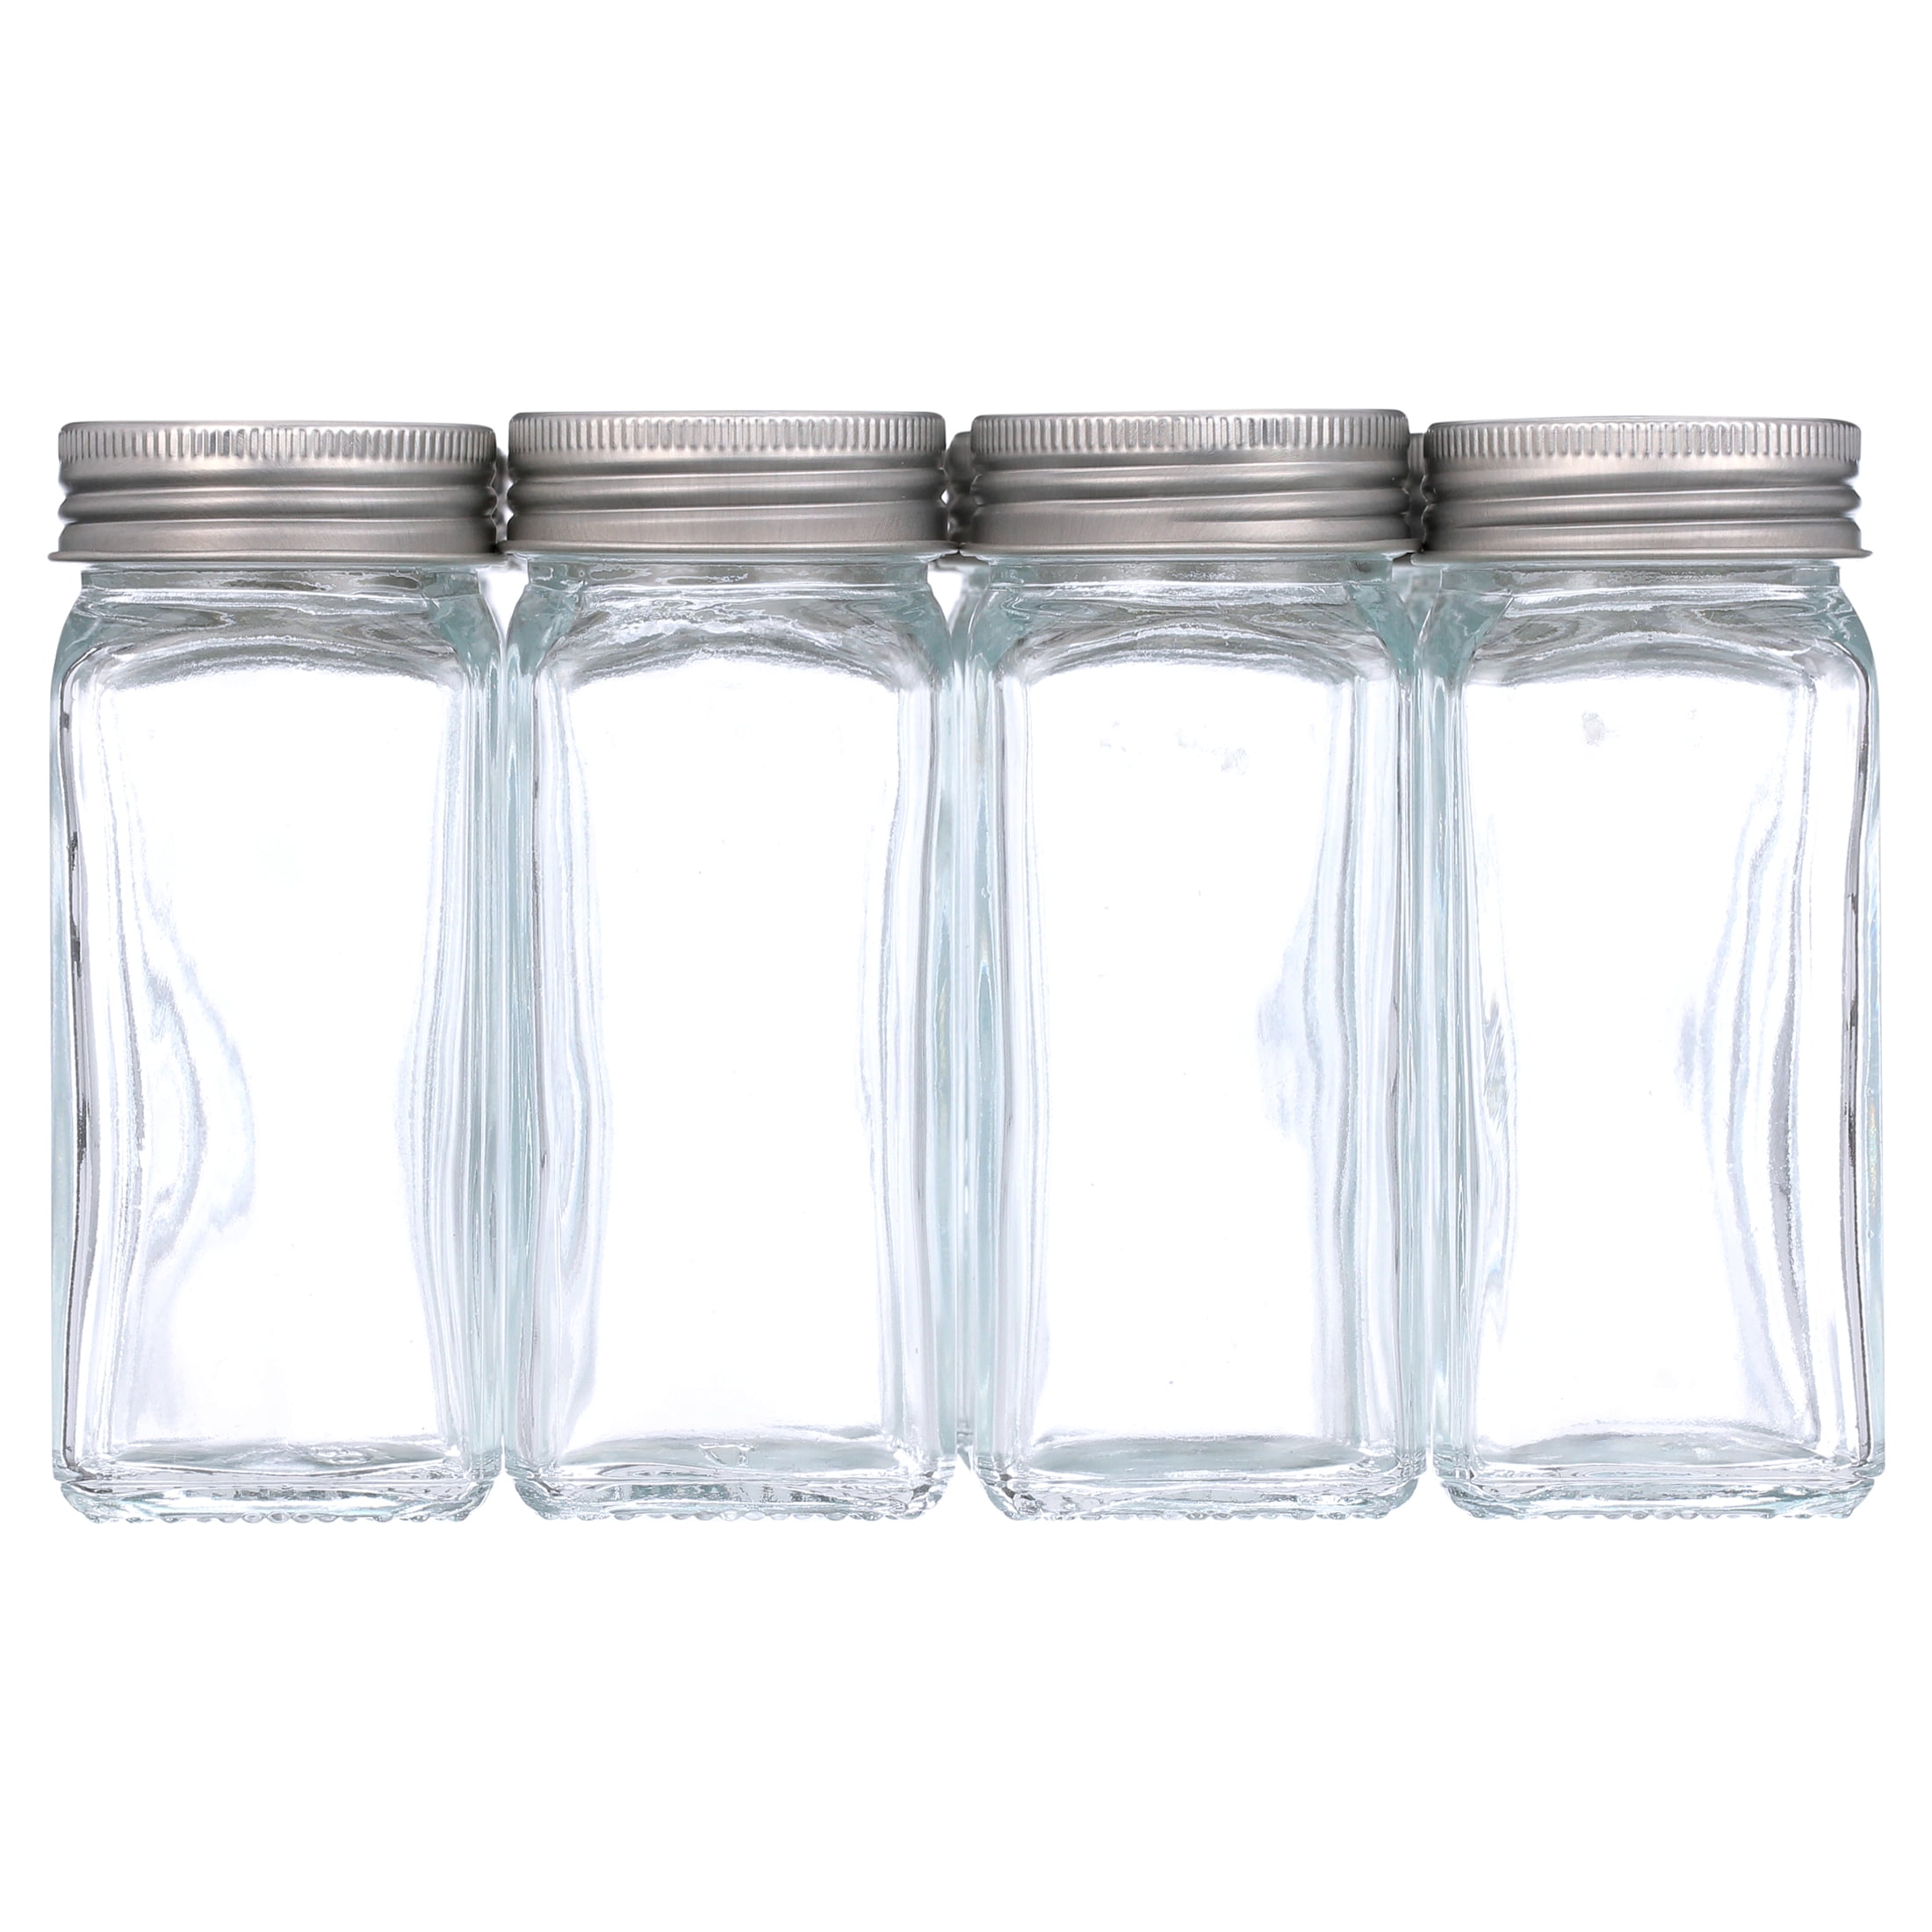 Vnanda Glass Spice Jars Empty Square Spice Bottles - Shaker Lids and Airtight Metal Caps, Silver